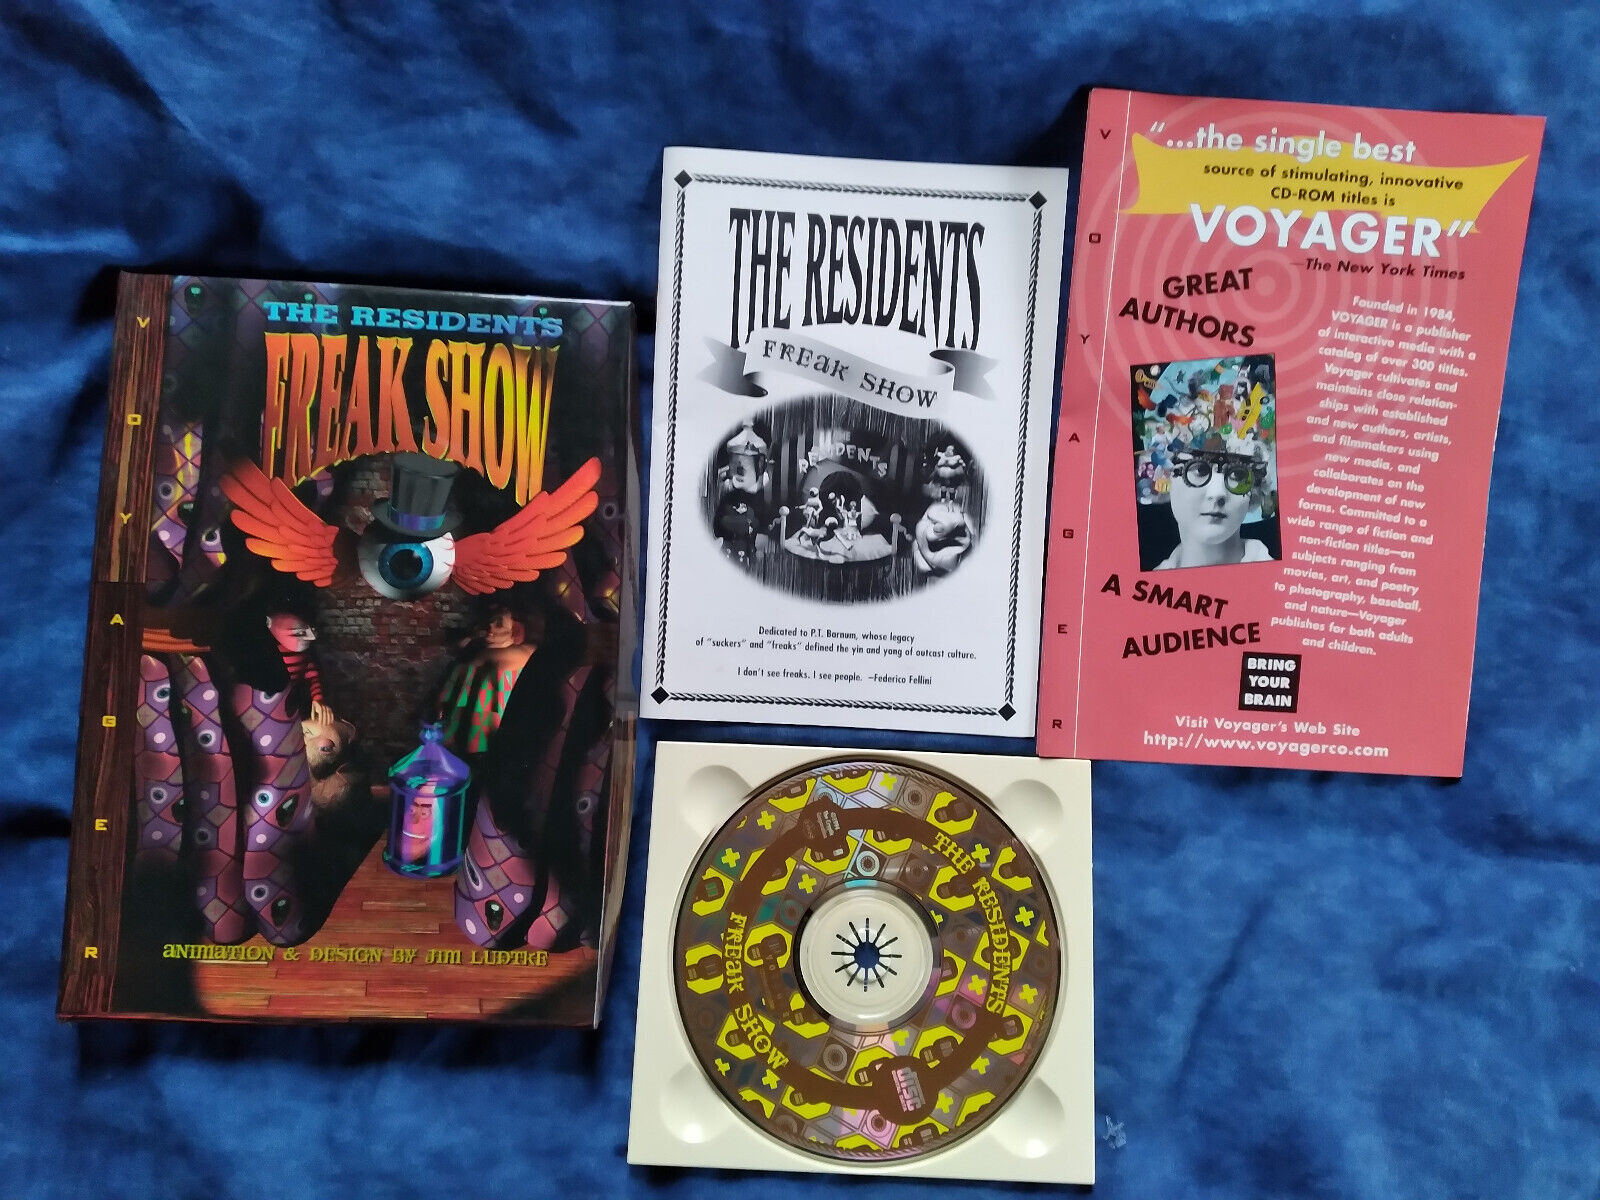 The Residents: Freak Show CD-ROM w/ Box And Booklet 1994 Vintage RARE